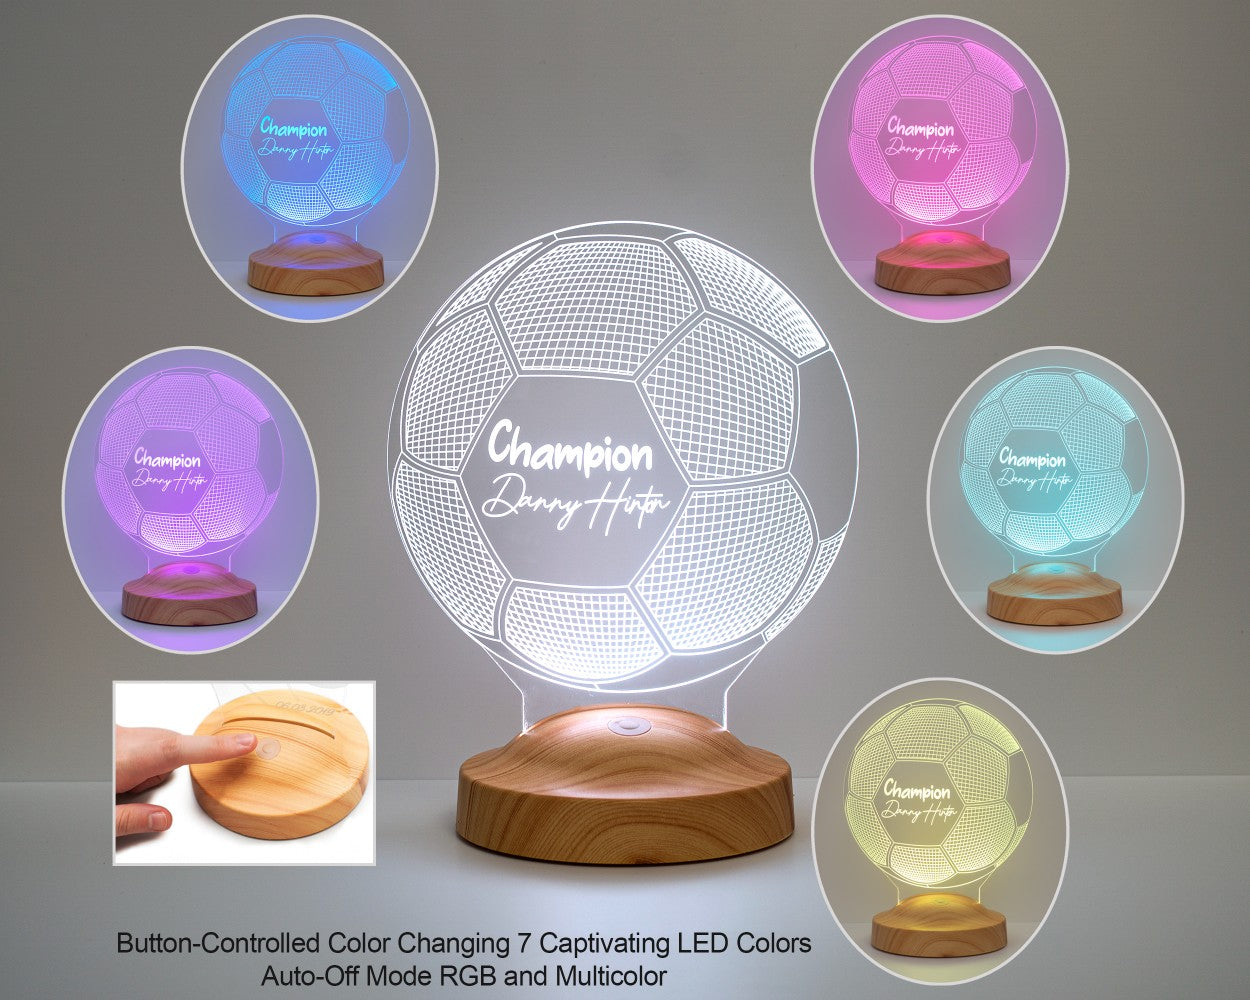 Football Personalized lamp with text of your choice